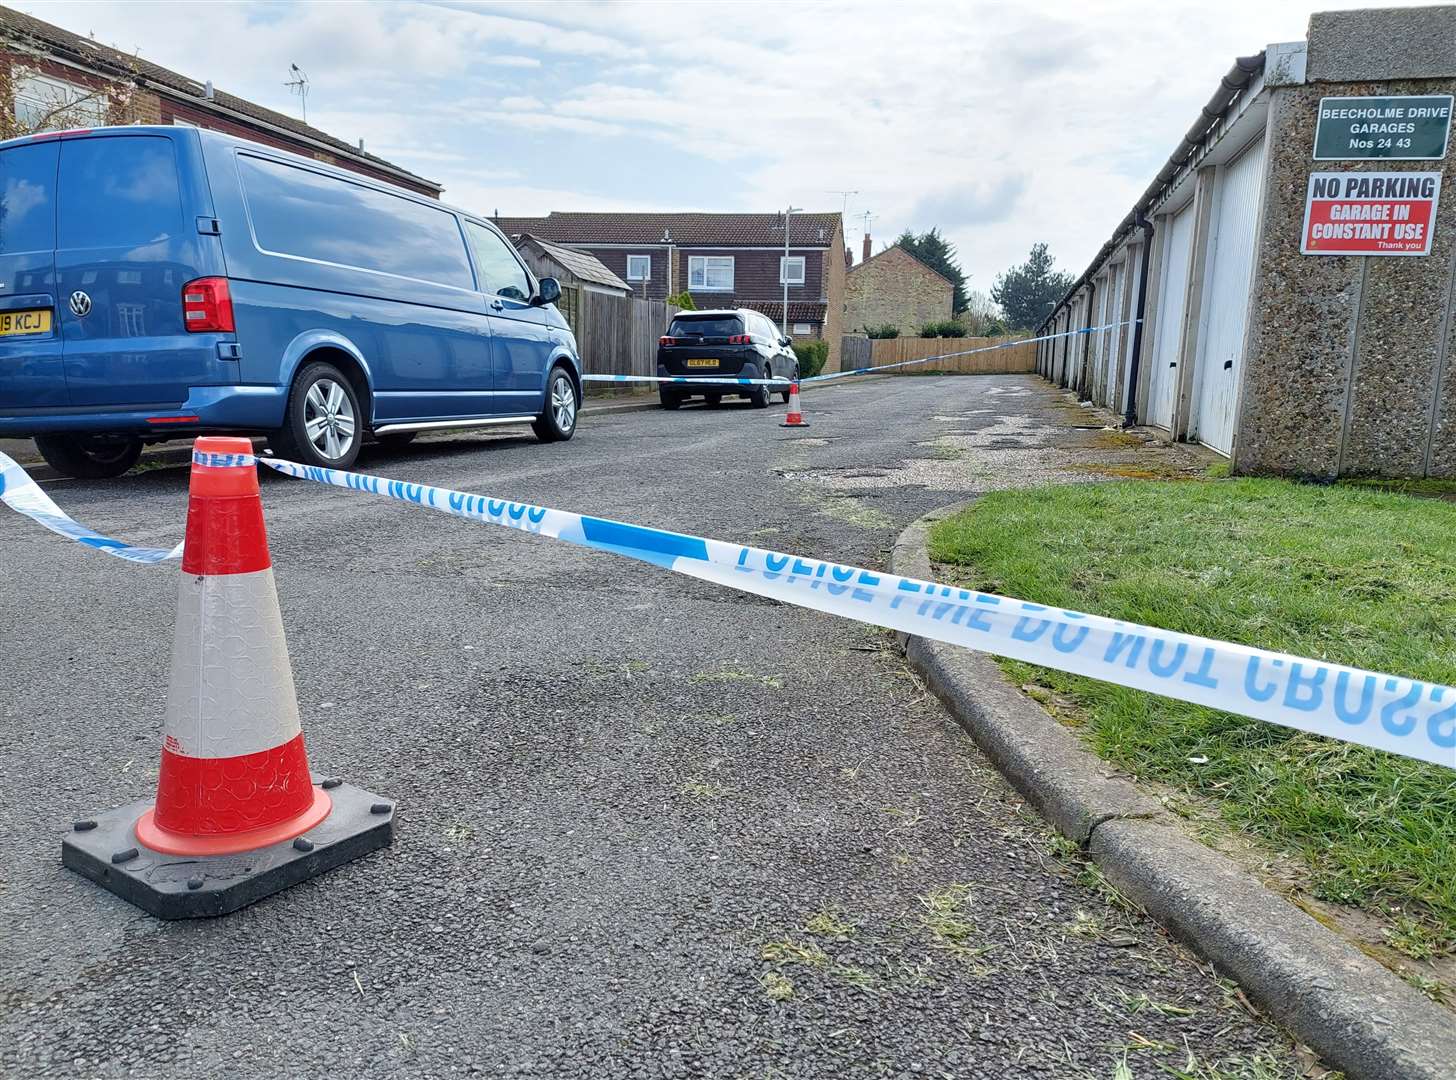 Police taped off a block of garages in Beecholme Drive